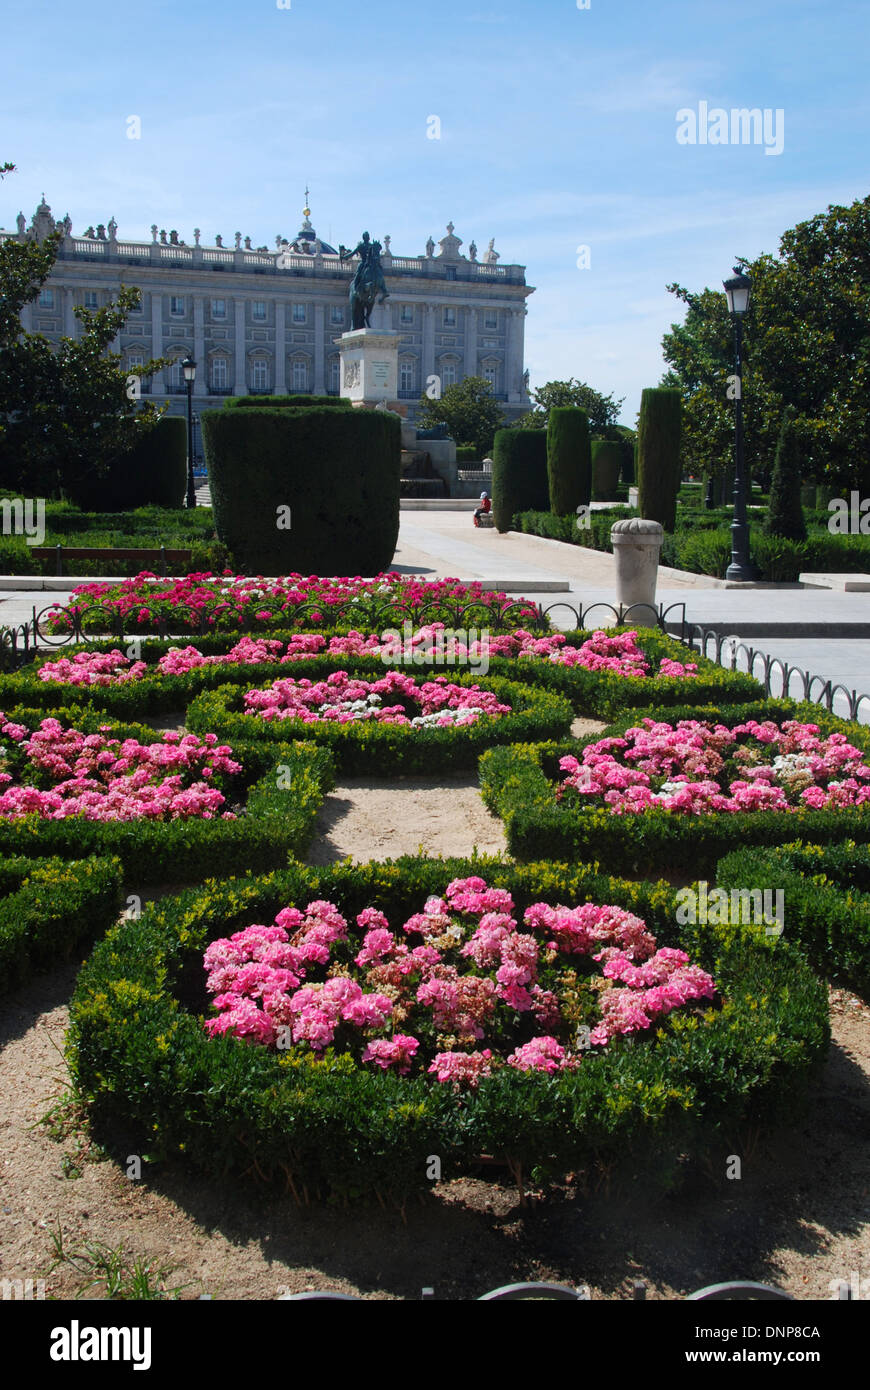 Gardens outside the Royal Palace of Madrid, Spain Stock Photo